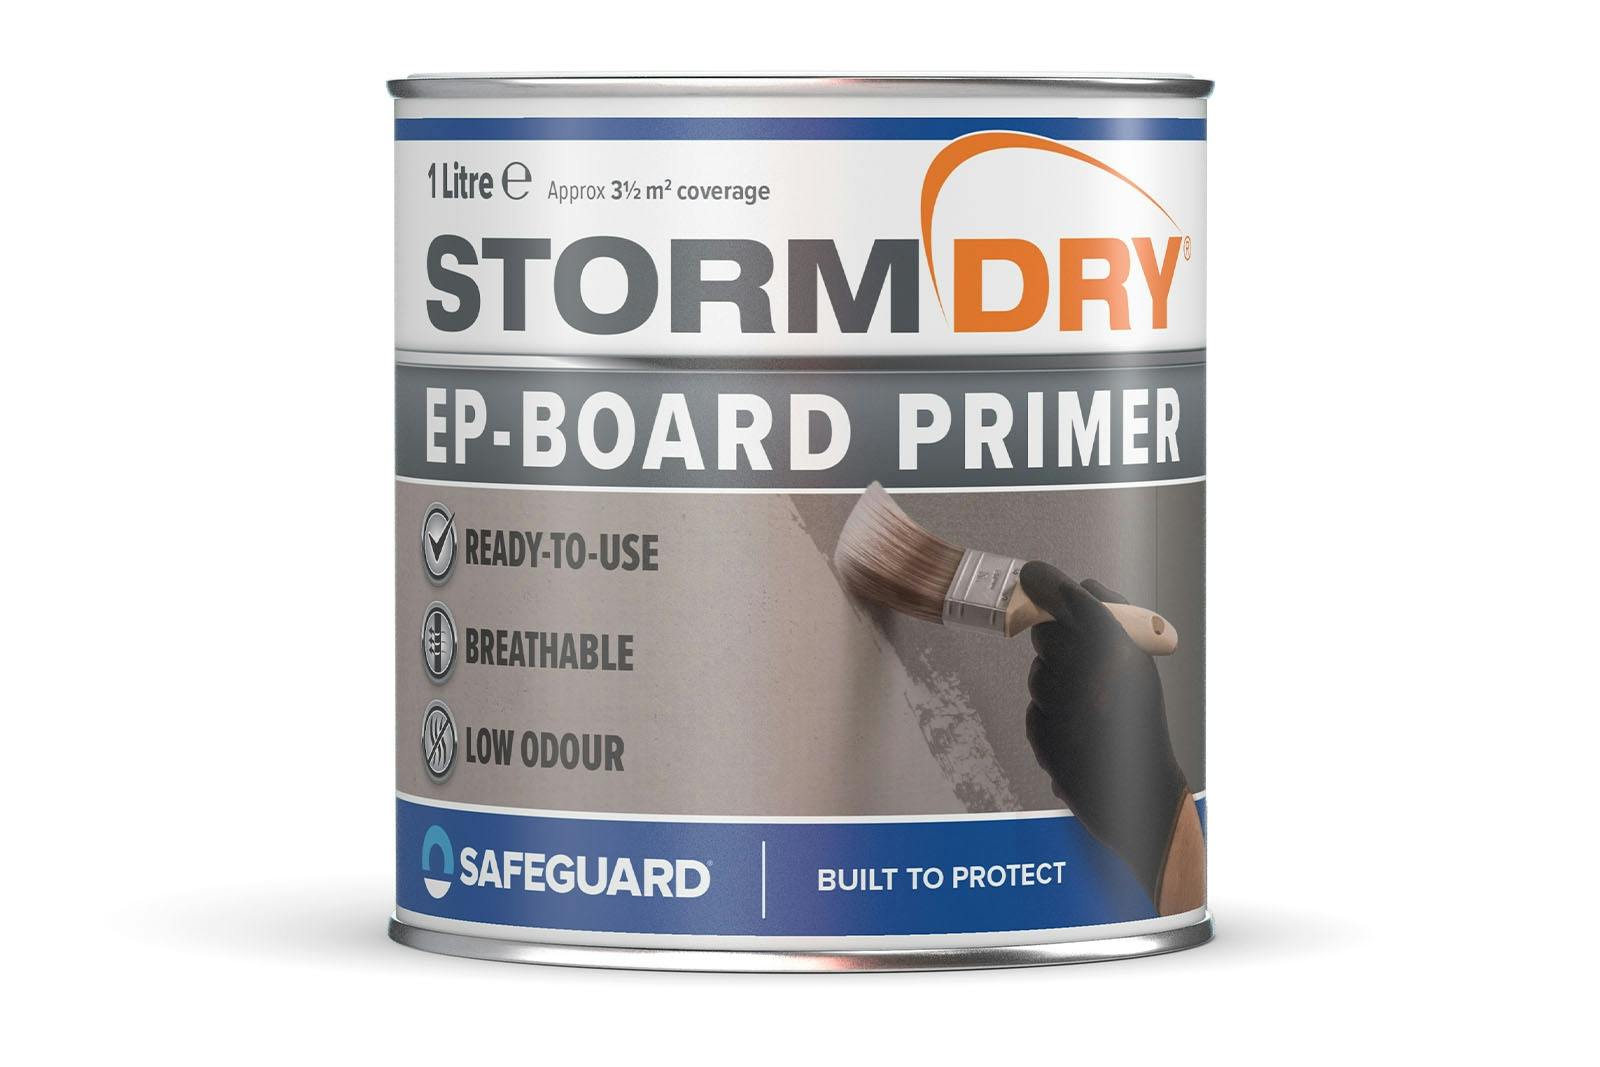 Stormdry EP-Board Primer prepares EP-Board for overpainting